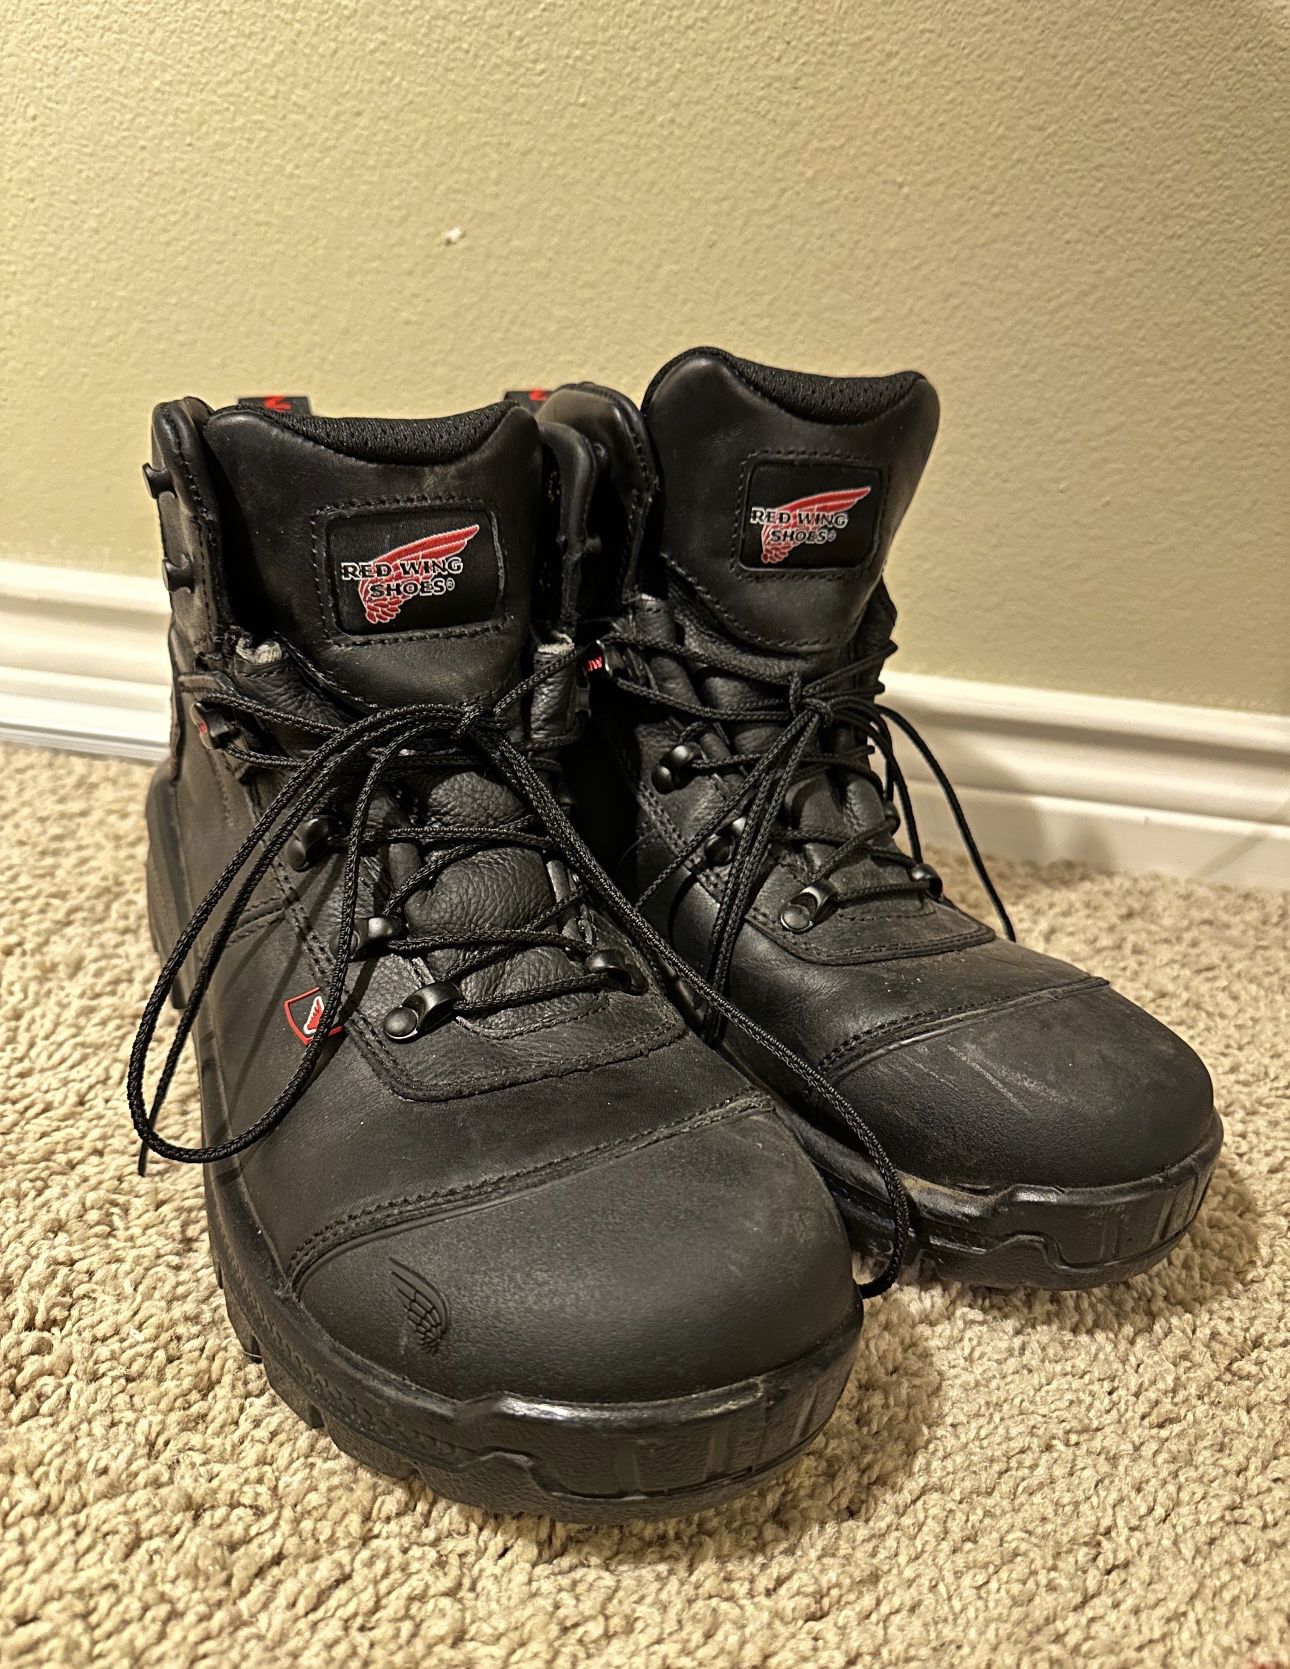 Red Wing Steel Toe Boots, CRV Model - Offers Welcome!